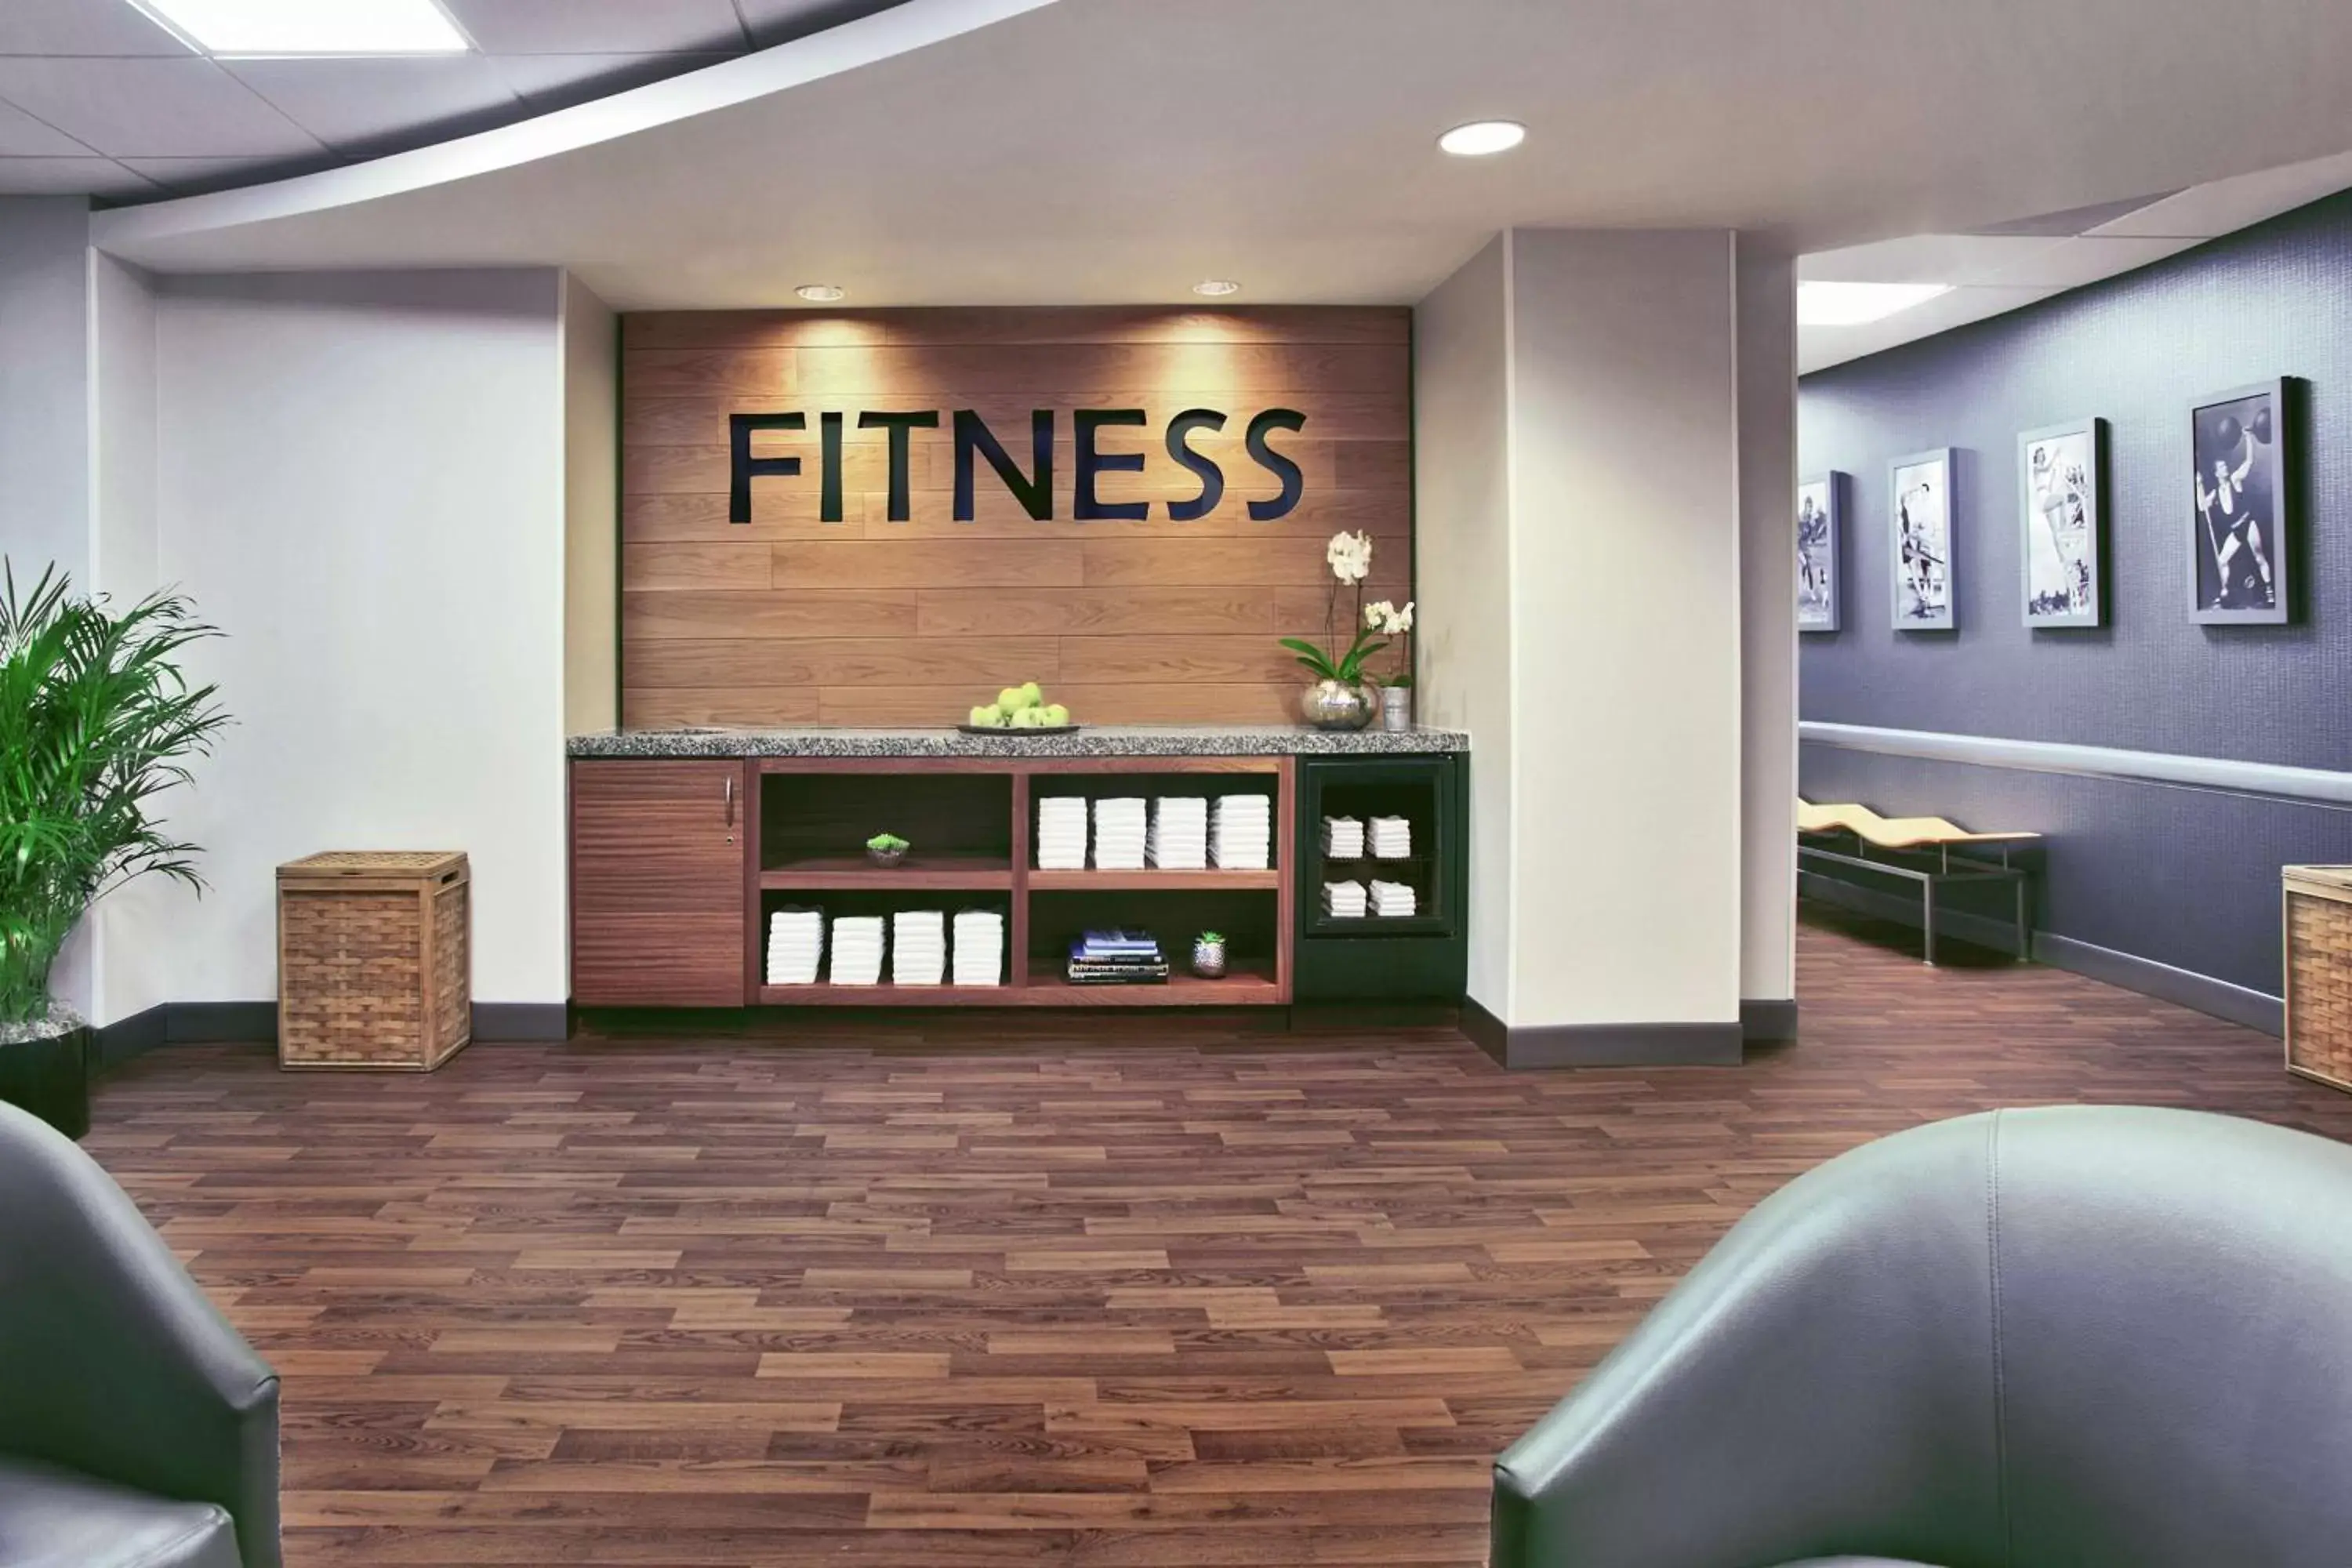 Fitness centre/facilities in The Palmer House Hilton